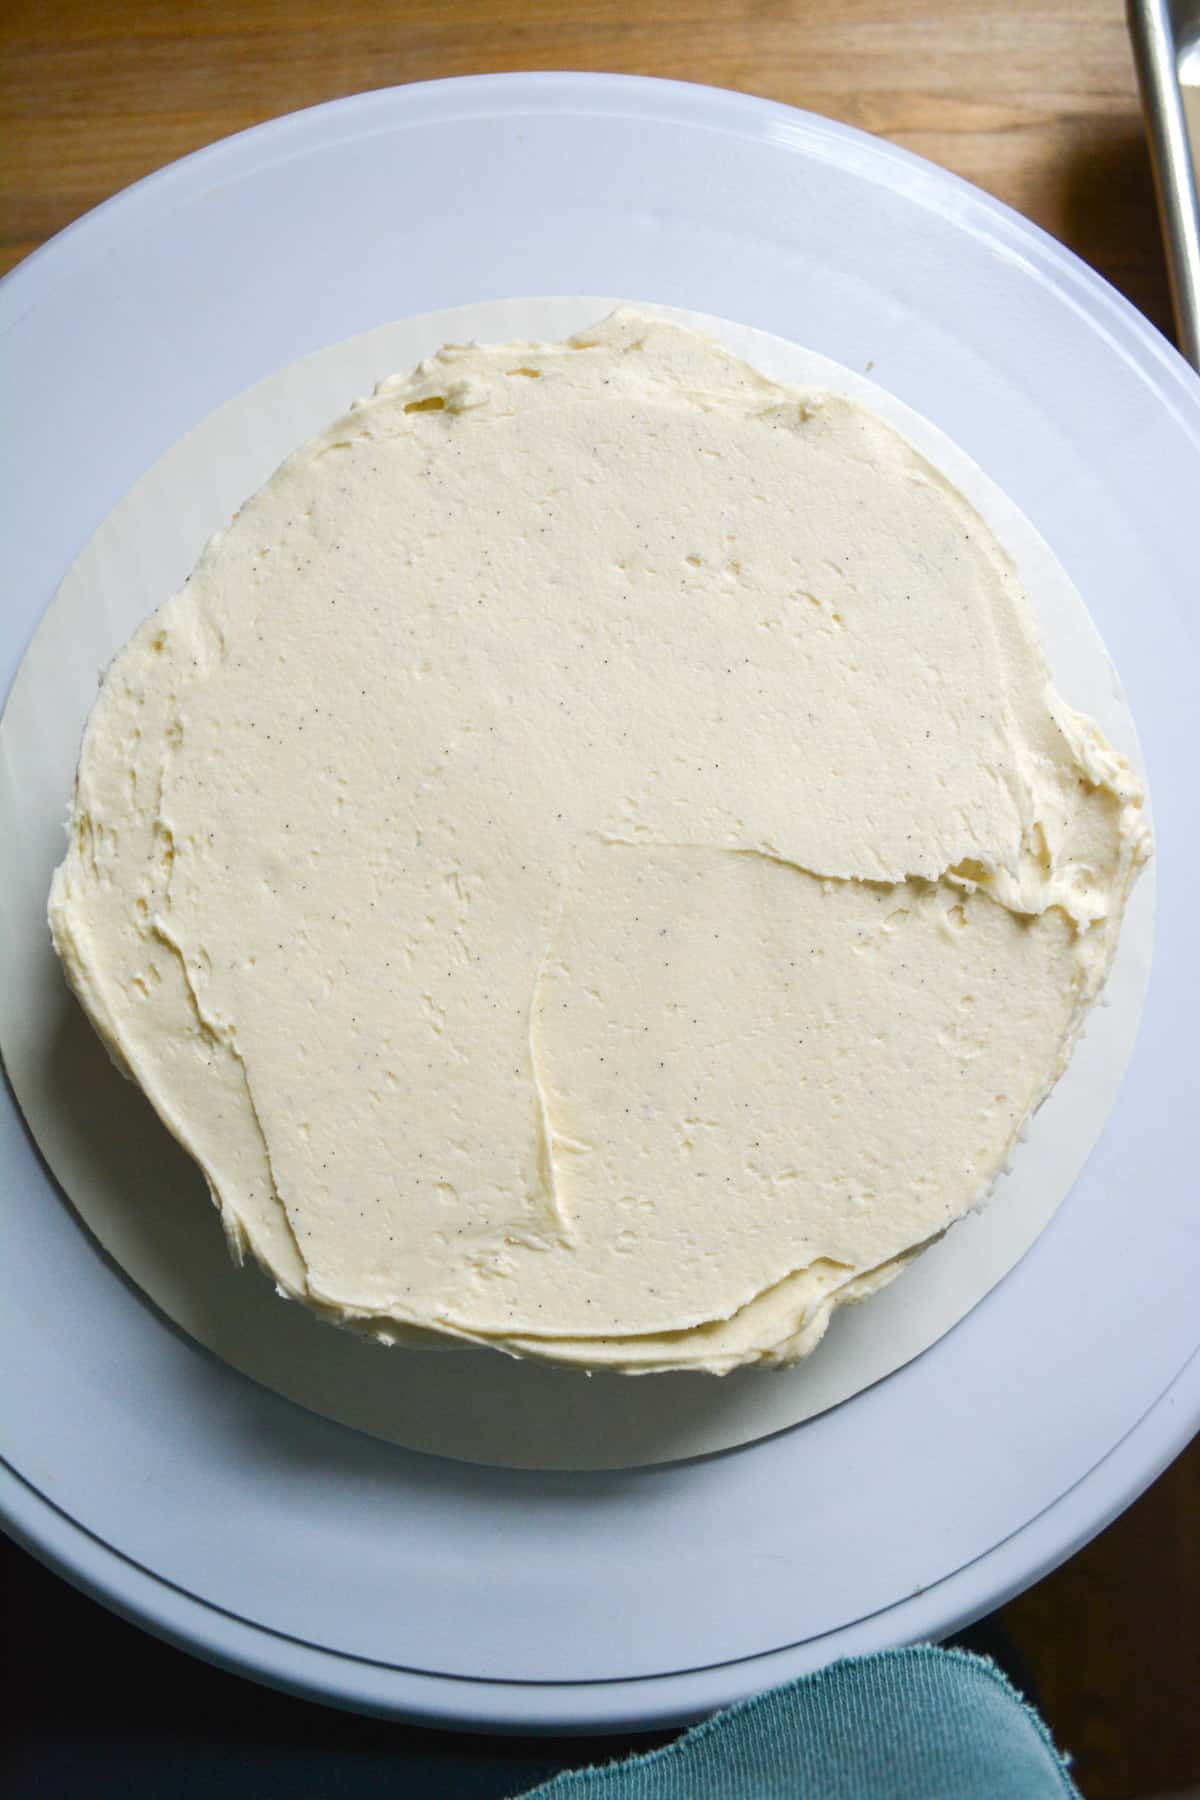 Vanilla frosting spread out on a cake layer.